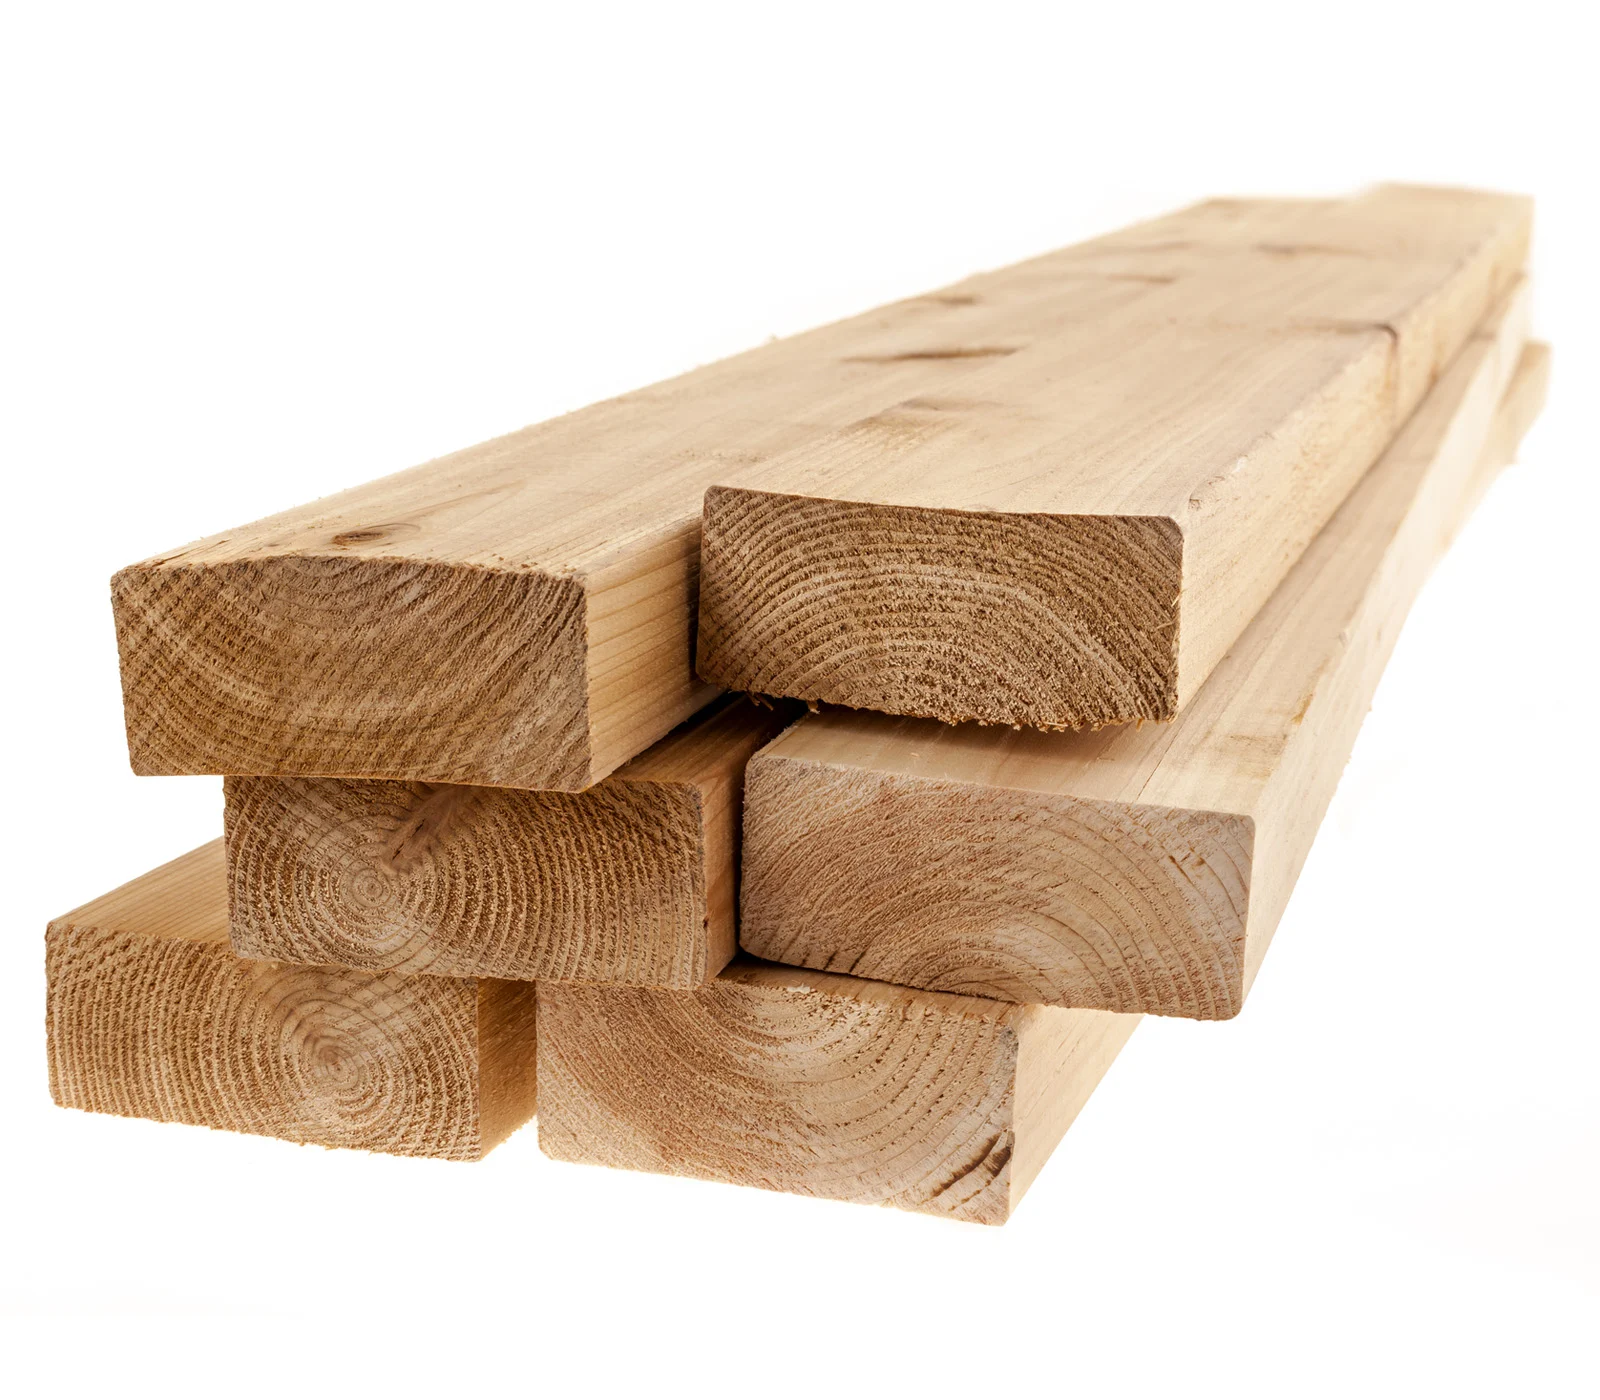 A group of stud lumber 